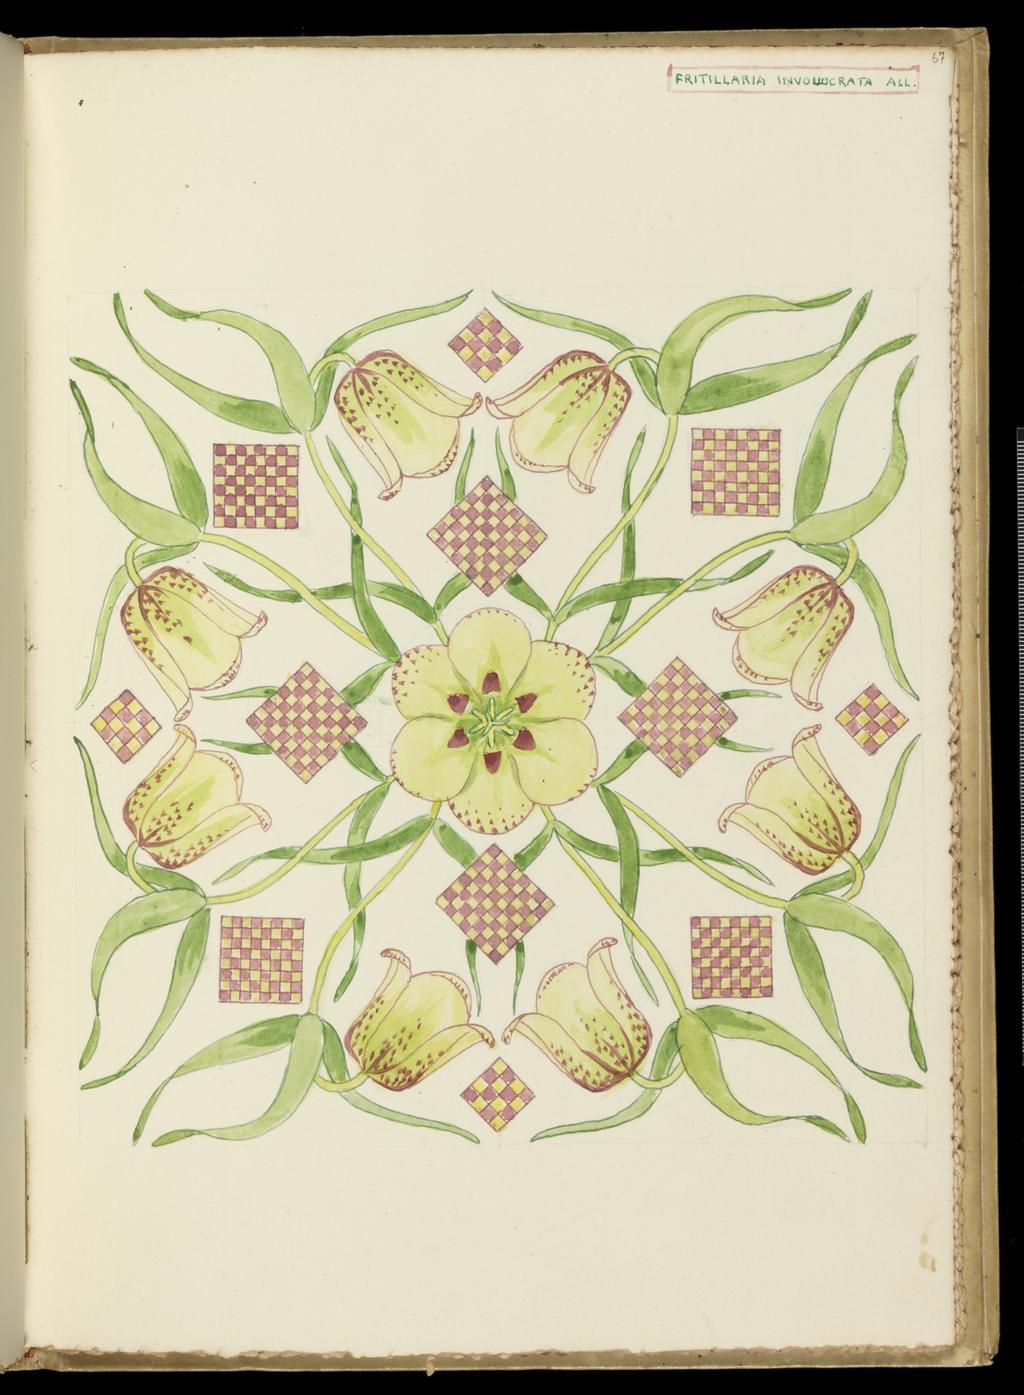 An image of Recto: Fritillaria Involuocrata All. Verso: Blank. Bicknell, Clarence (British, 1842-1918). Watercolour over traces of graphite, surrounded by graphite line on all sides, on paper, height, leaf, 325 mm, width, leaf, 230 mm, 1911. Part of vellum bound sketchbook with brown leather cover details and closure straps. Contains 76 leaves. Front cover has a vertical rectangular box containing an acorn and oak leaf design in red and green inks, with the initials 'M.B.' (Margaret Berry).